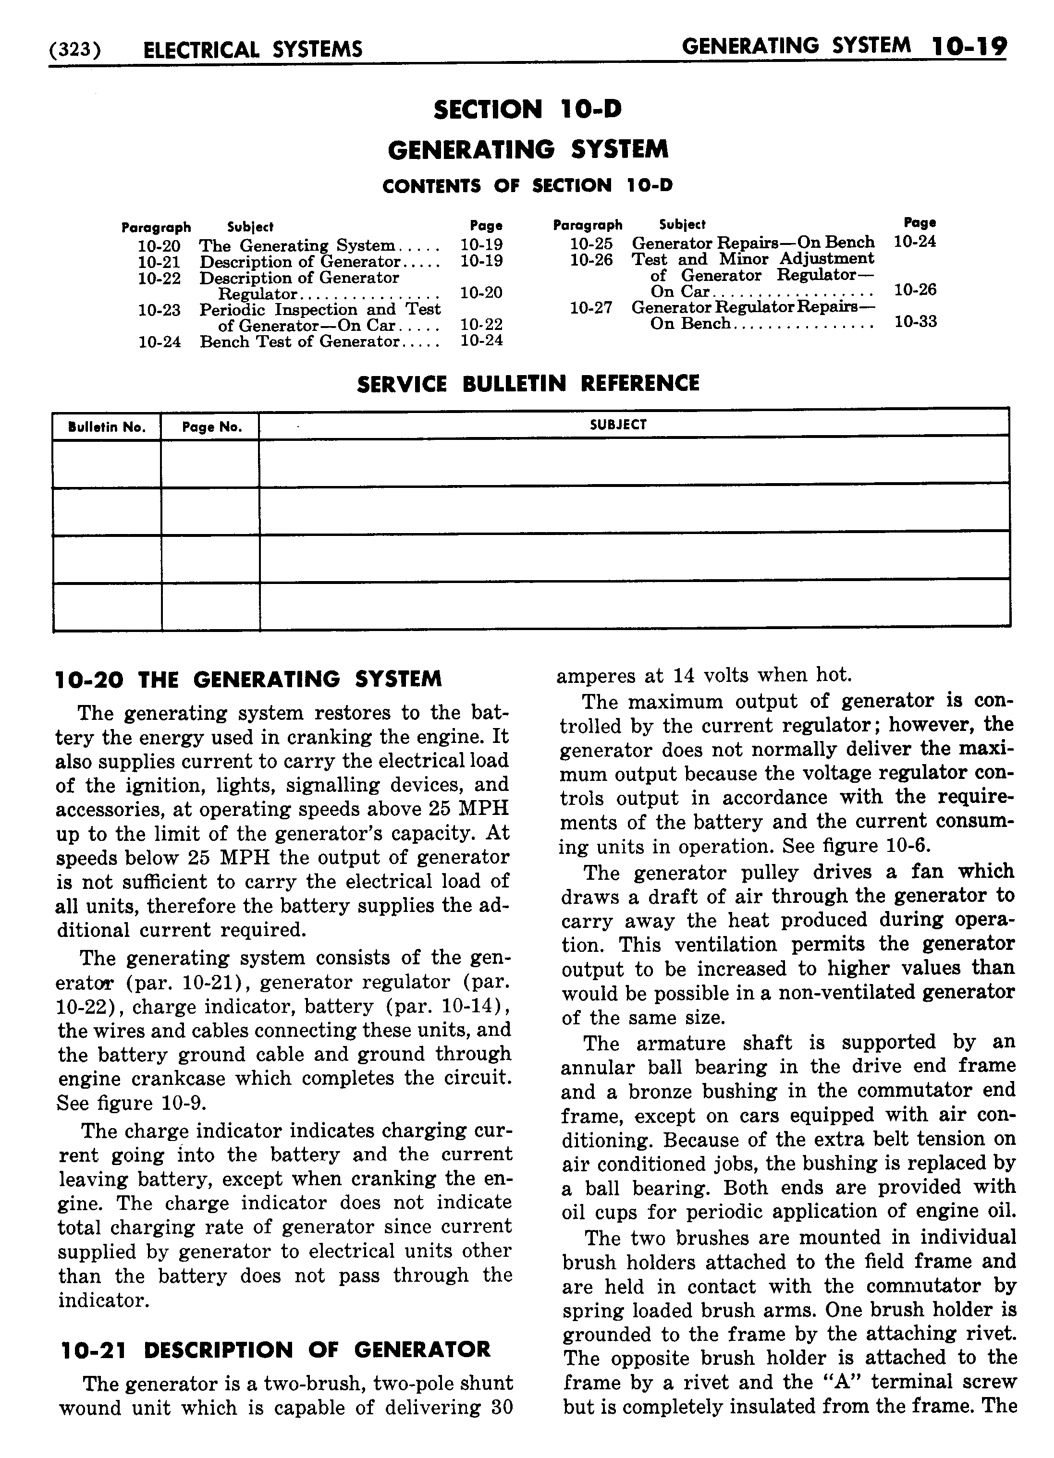 n_11 1955 Buick Shop Manual - Electrical Systems-019-019.jpg